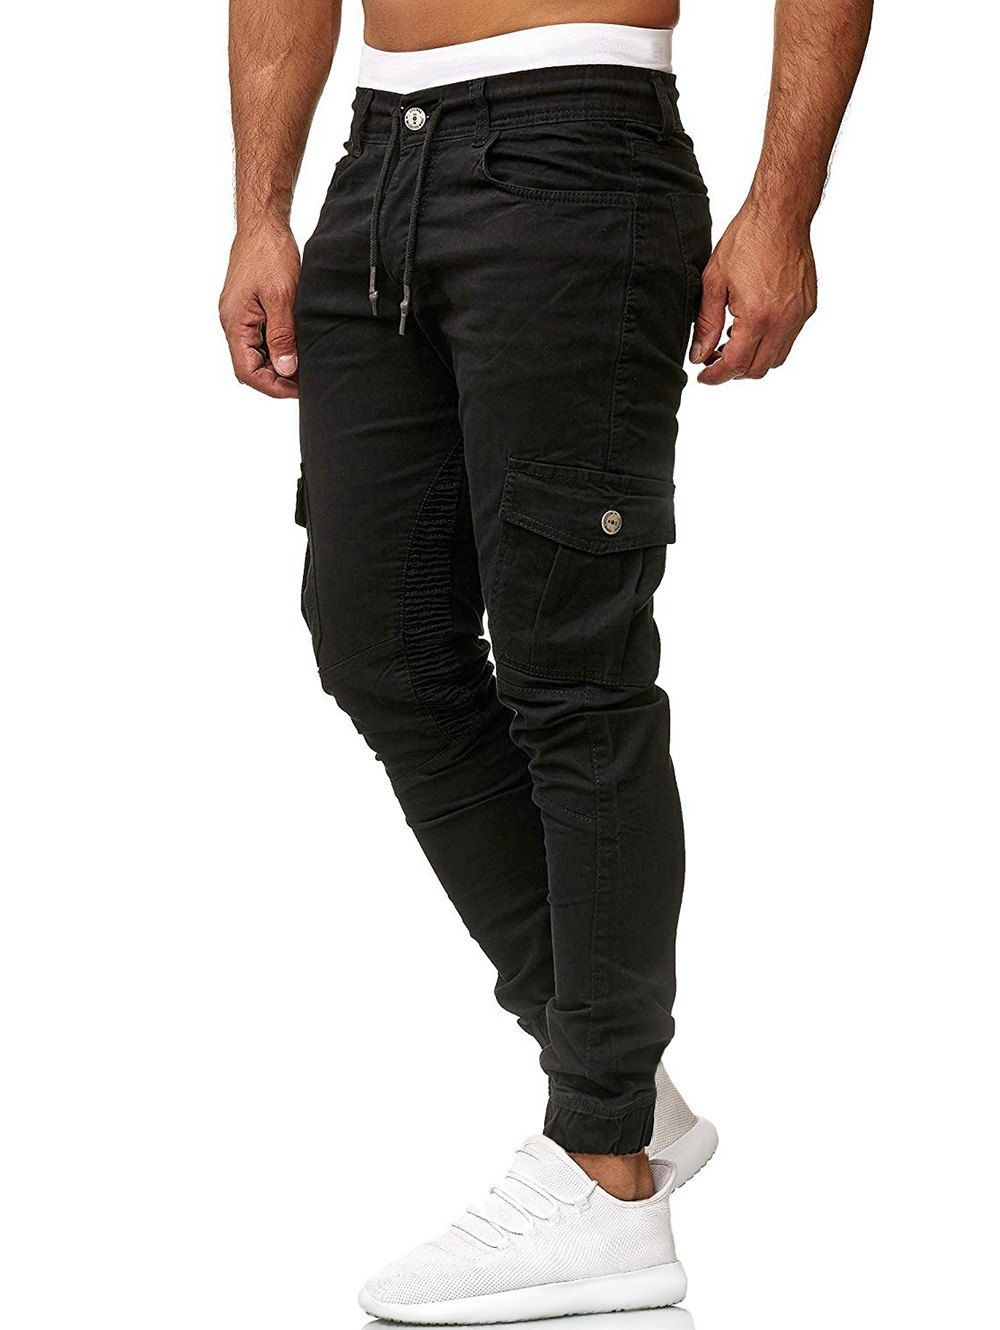 [38% OFF] 2020 Pleated Trim Drawstring Cargo Jogger Pants In BLACK ...